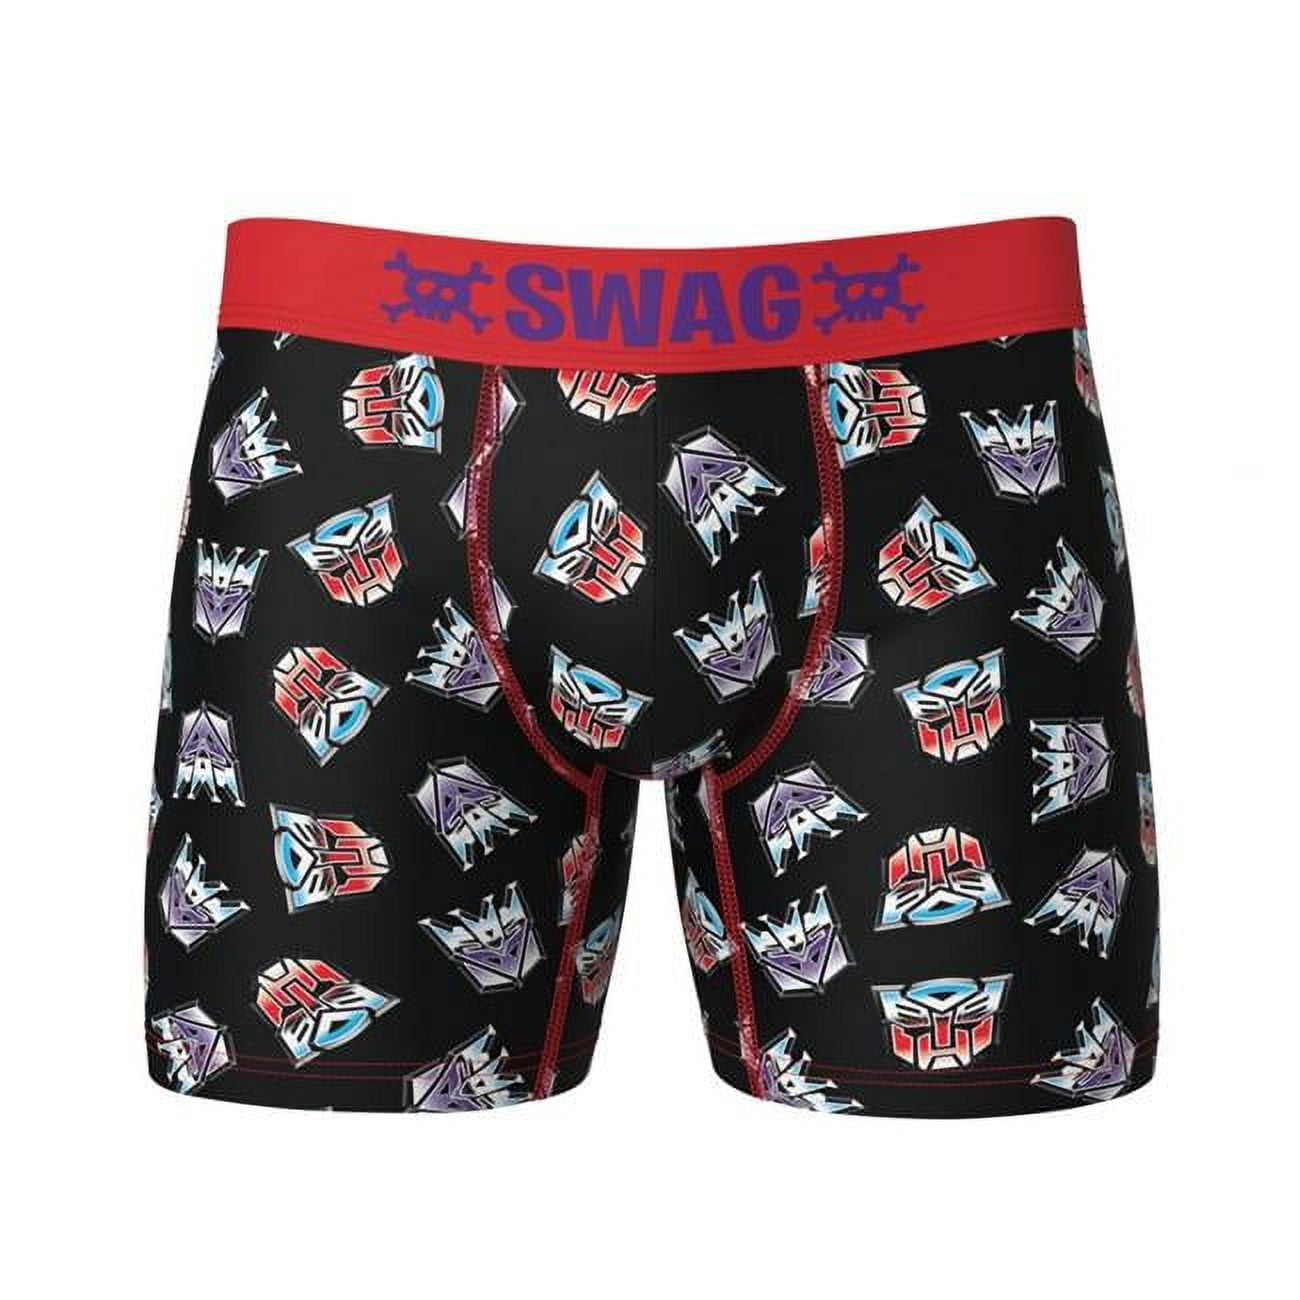 Transformers Icons Swag Boxer Briefs-XLarge (40-42) 